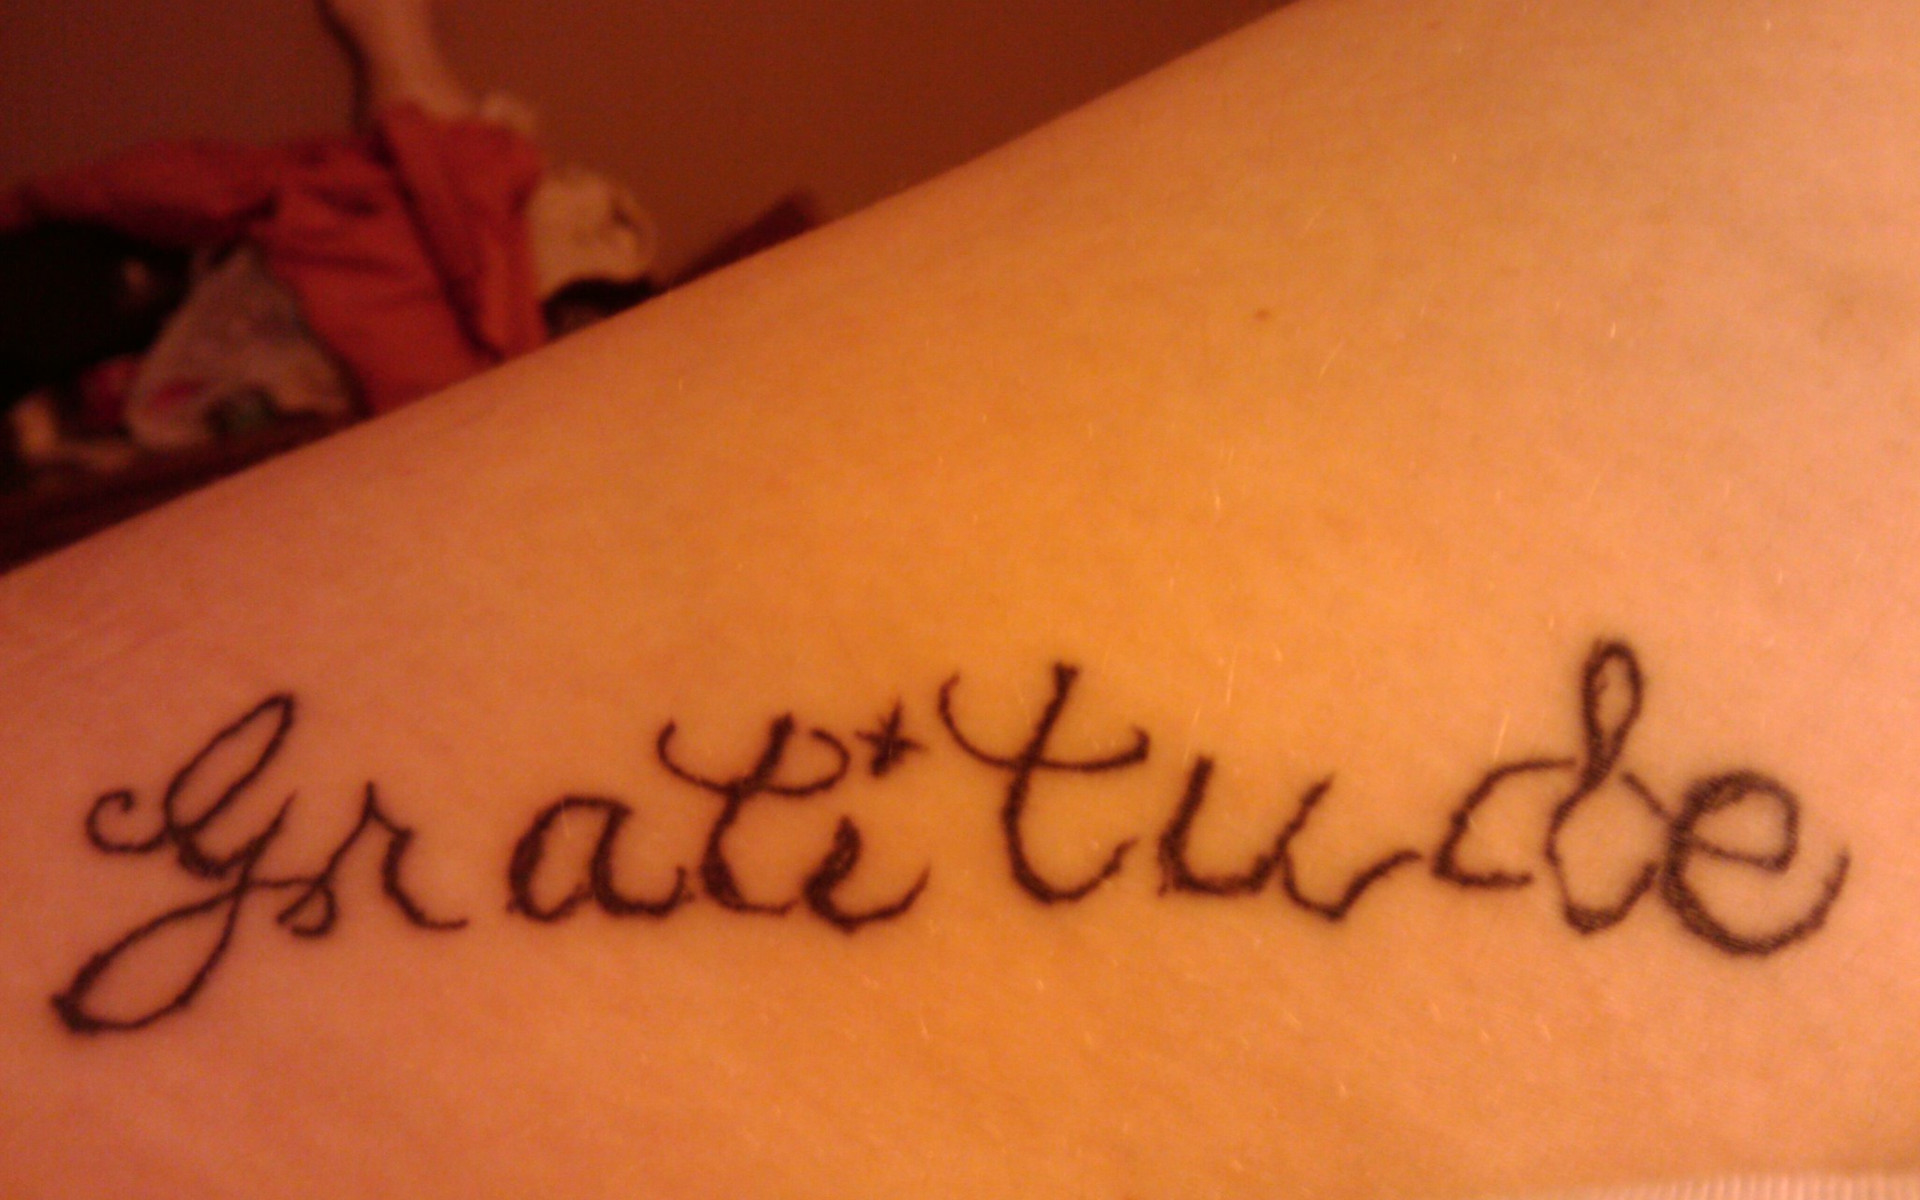 Tattoo With The Word Gratitude